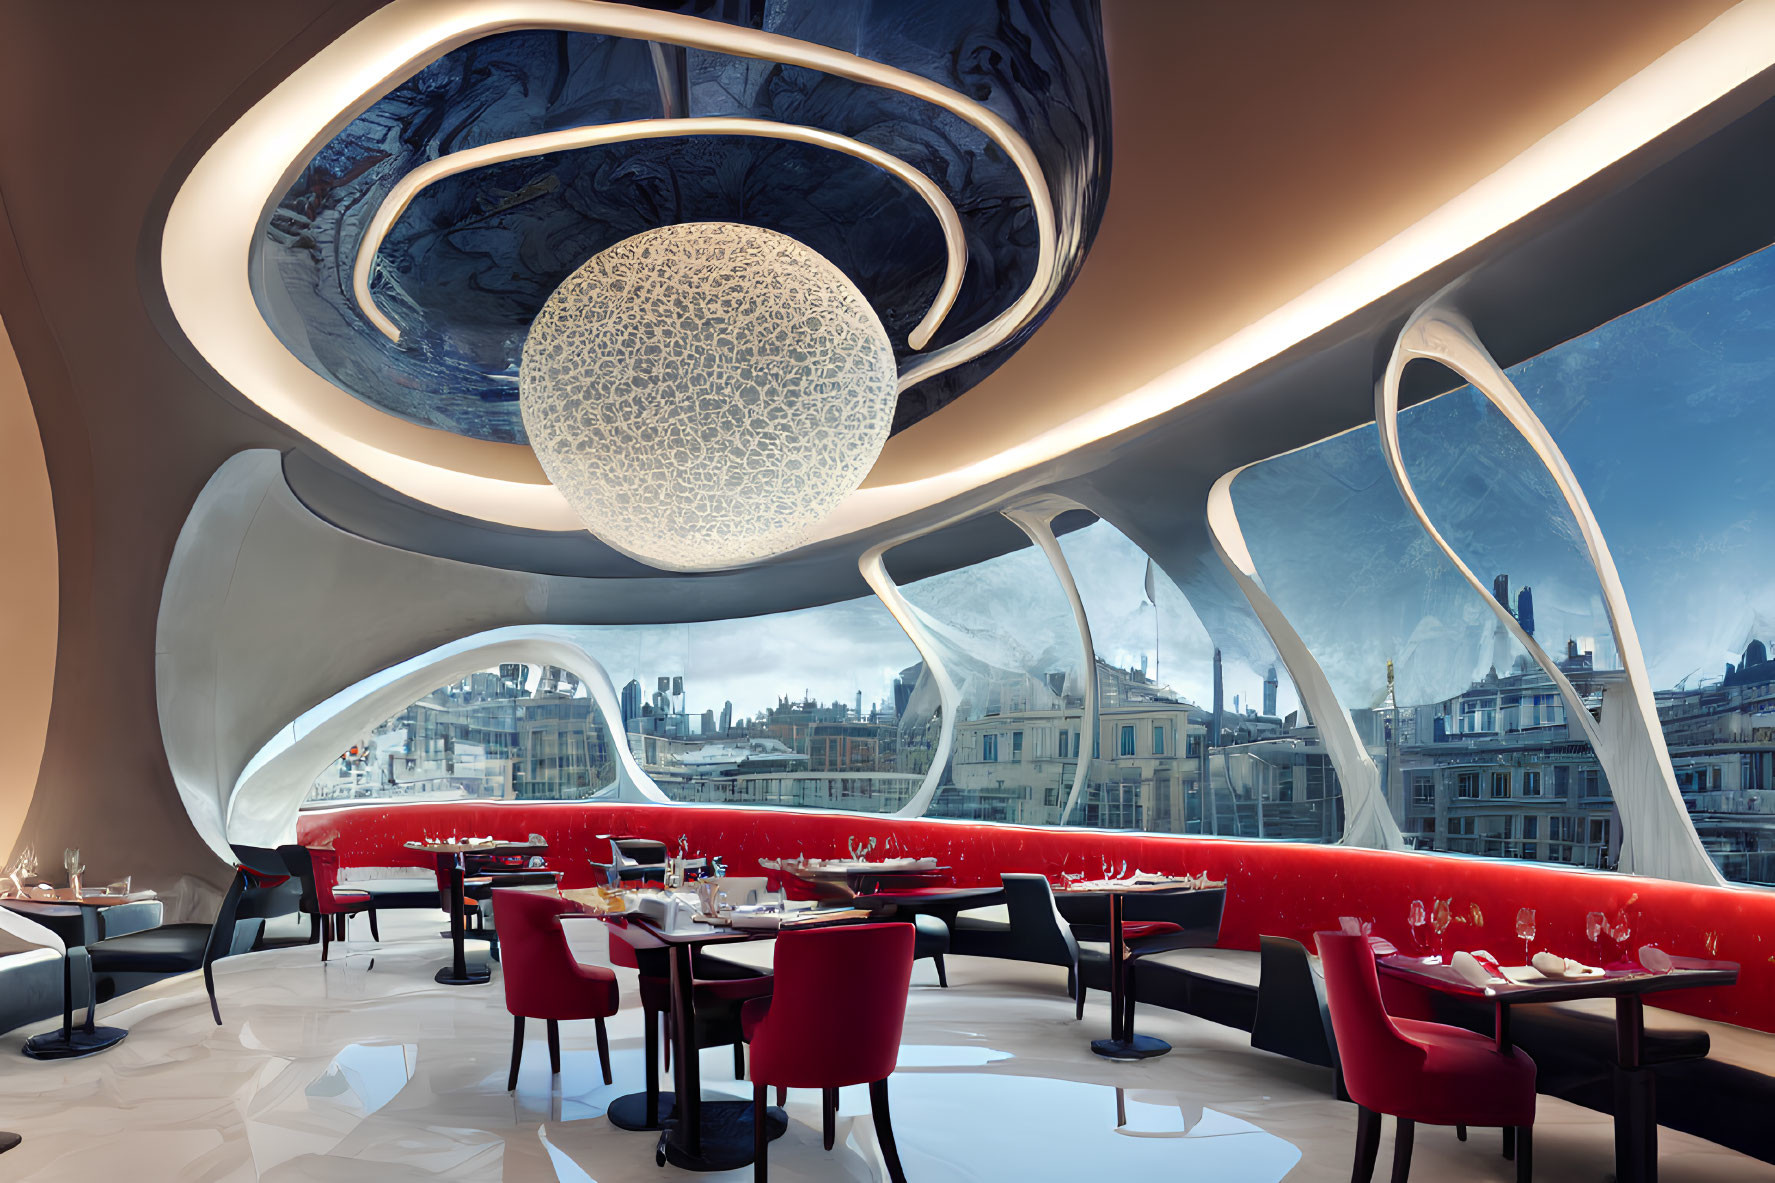 Modern restaurant interior with oval shapes, red and white colors, unique lighting, and city views